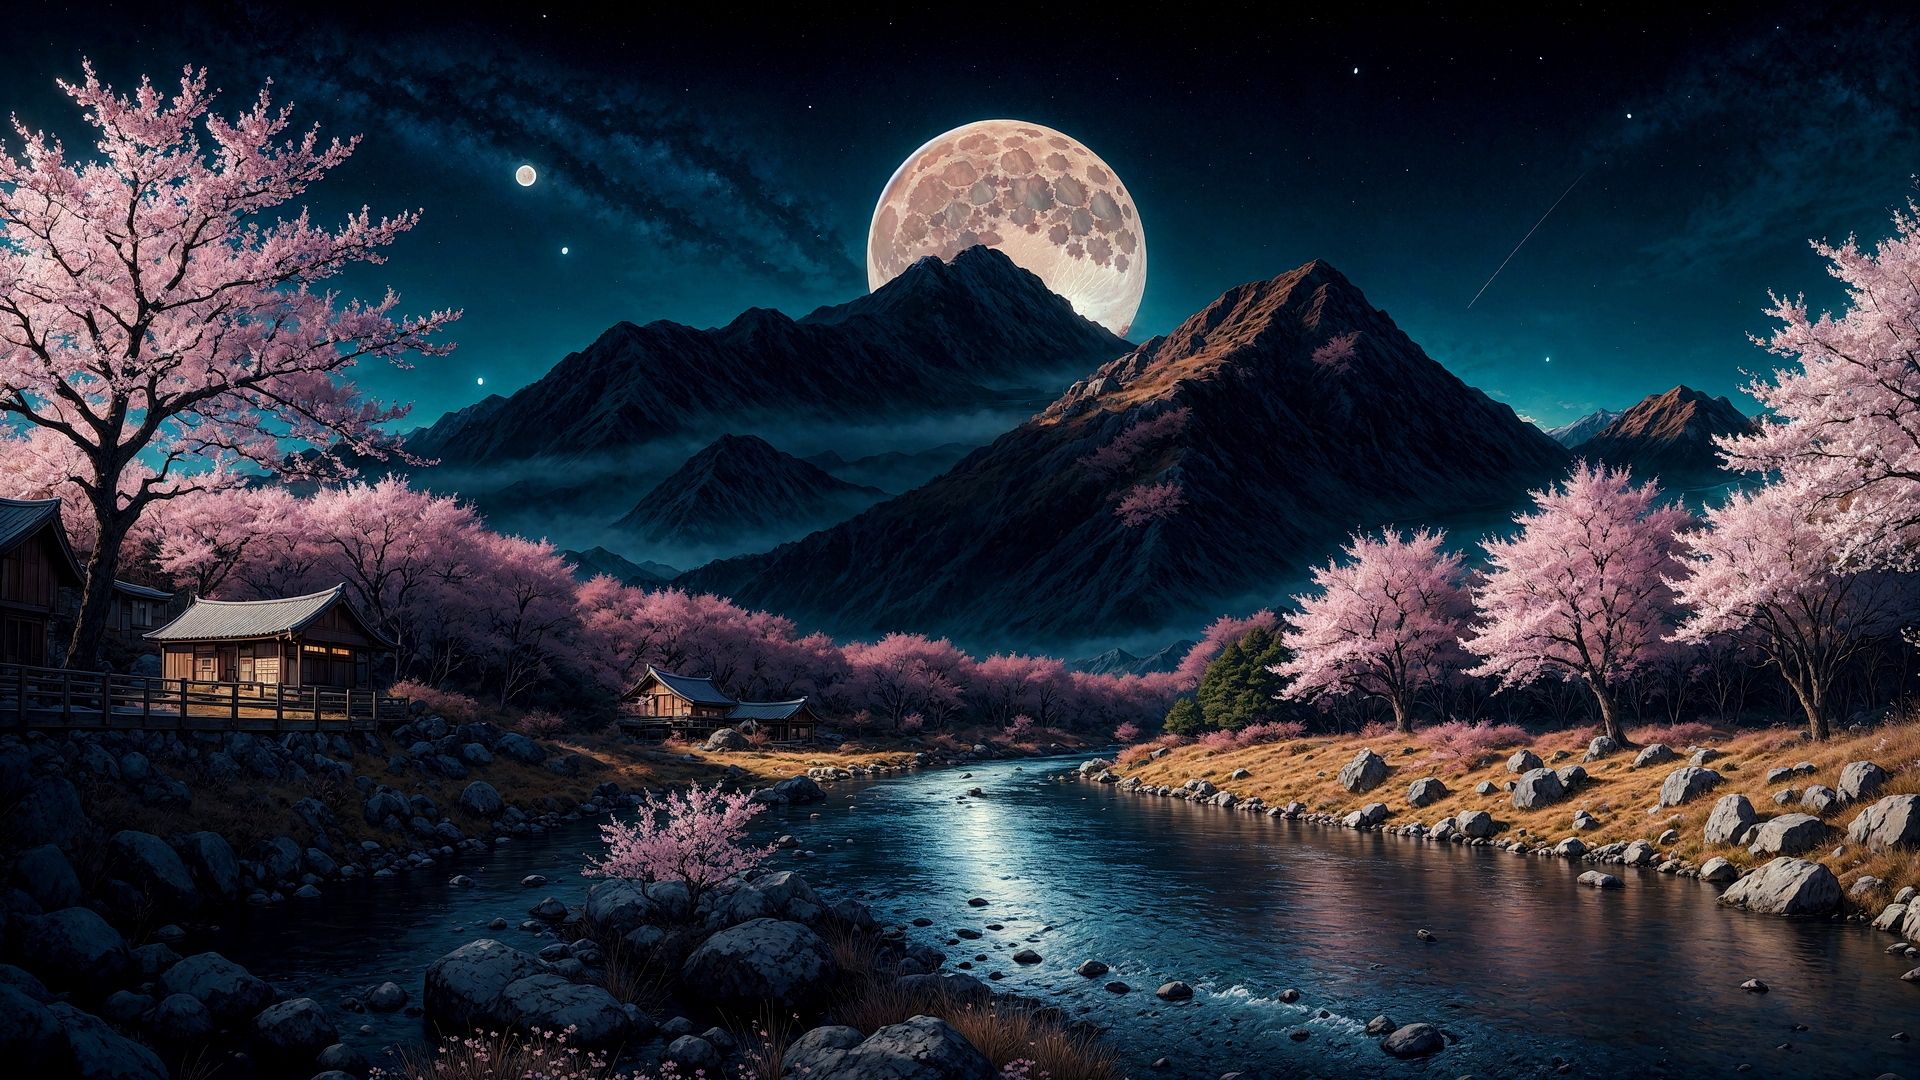 Mountain night landscape and trees